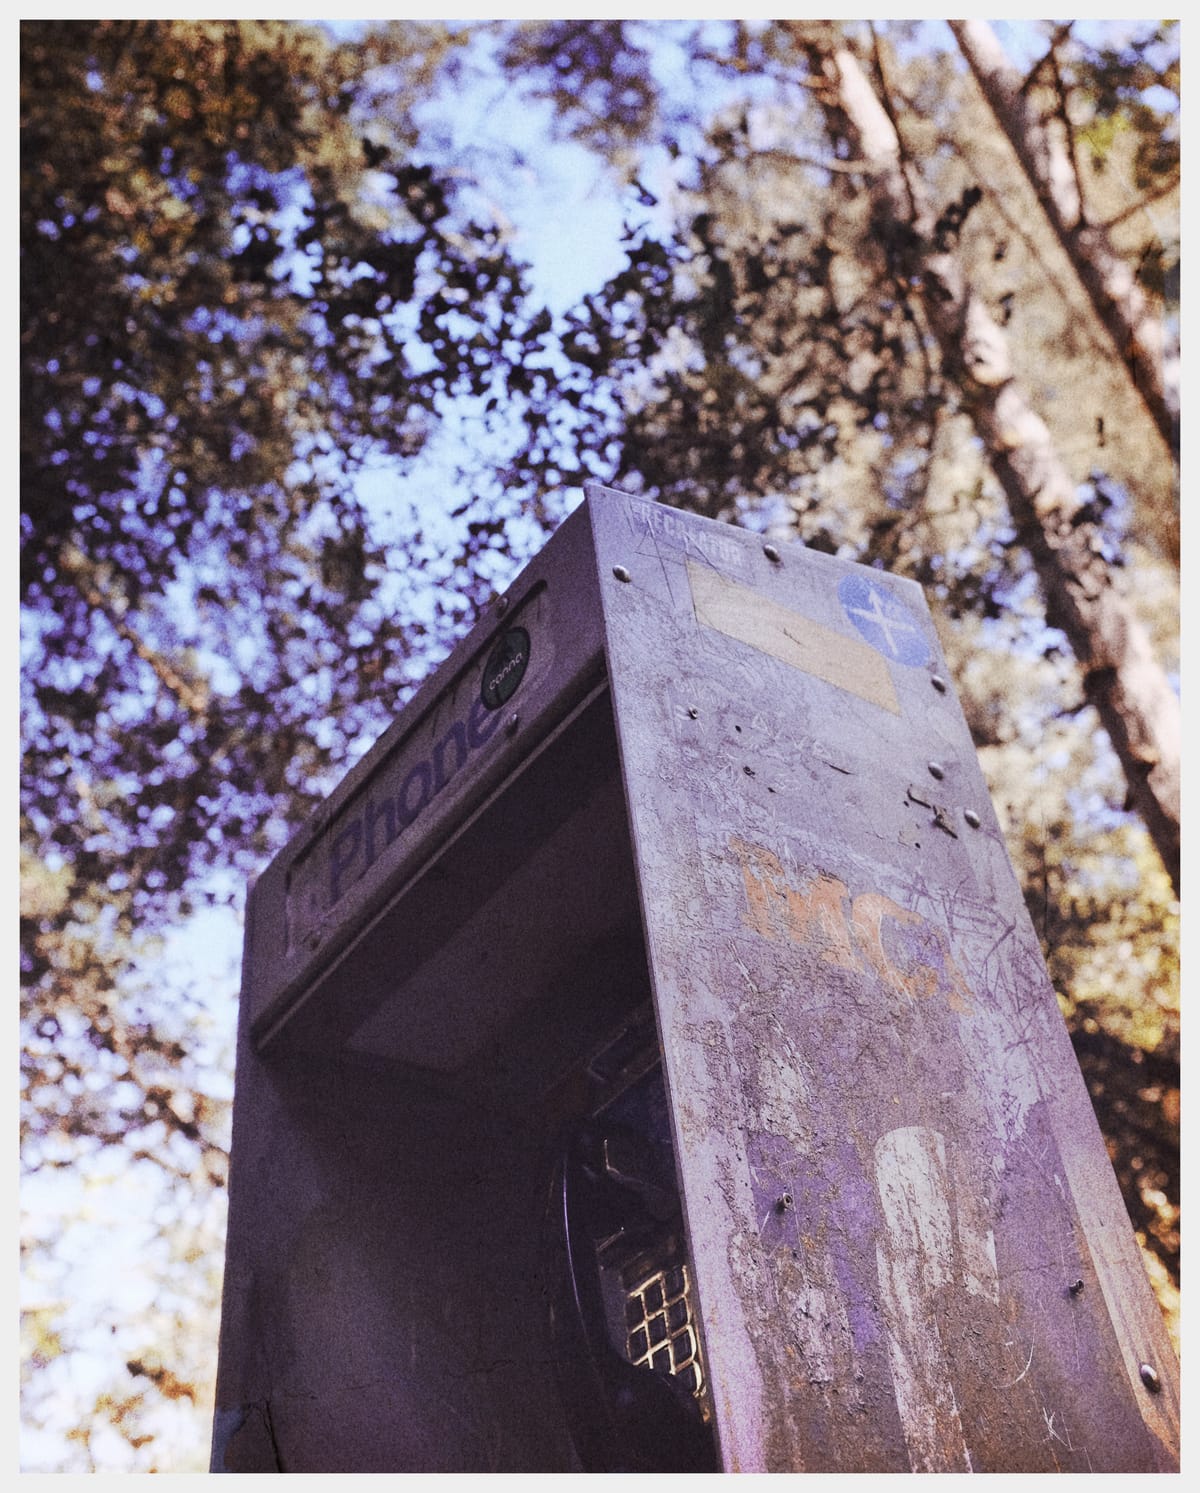 An old and busted pay phone amongst the trees in a forest